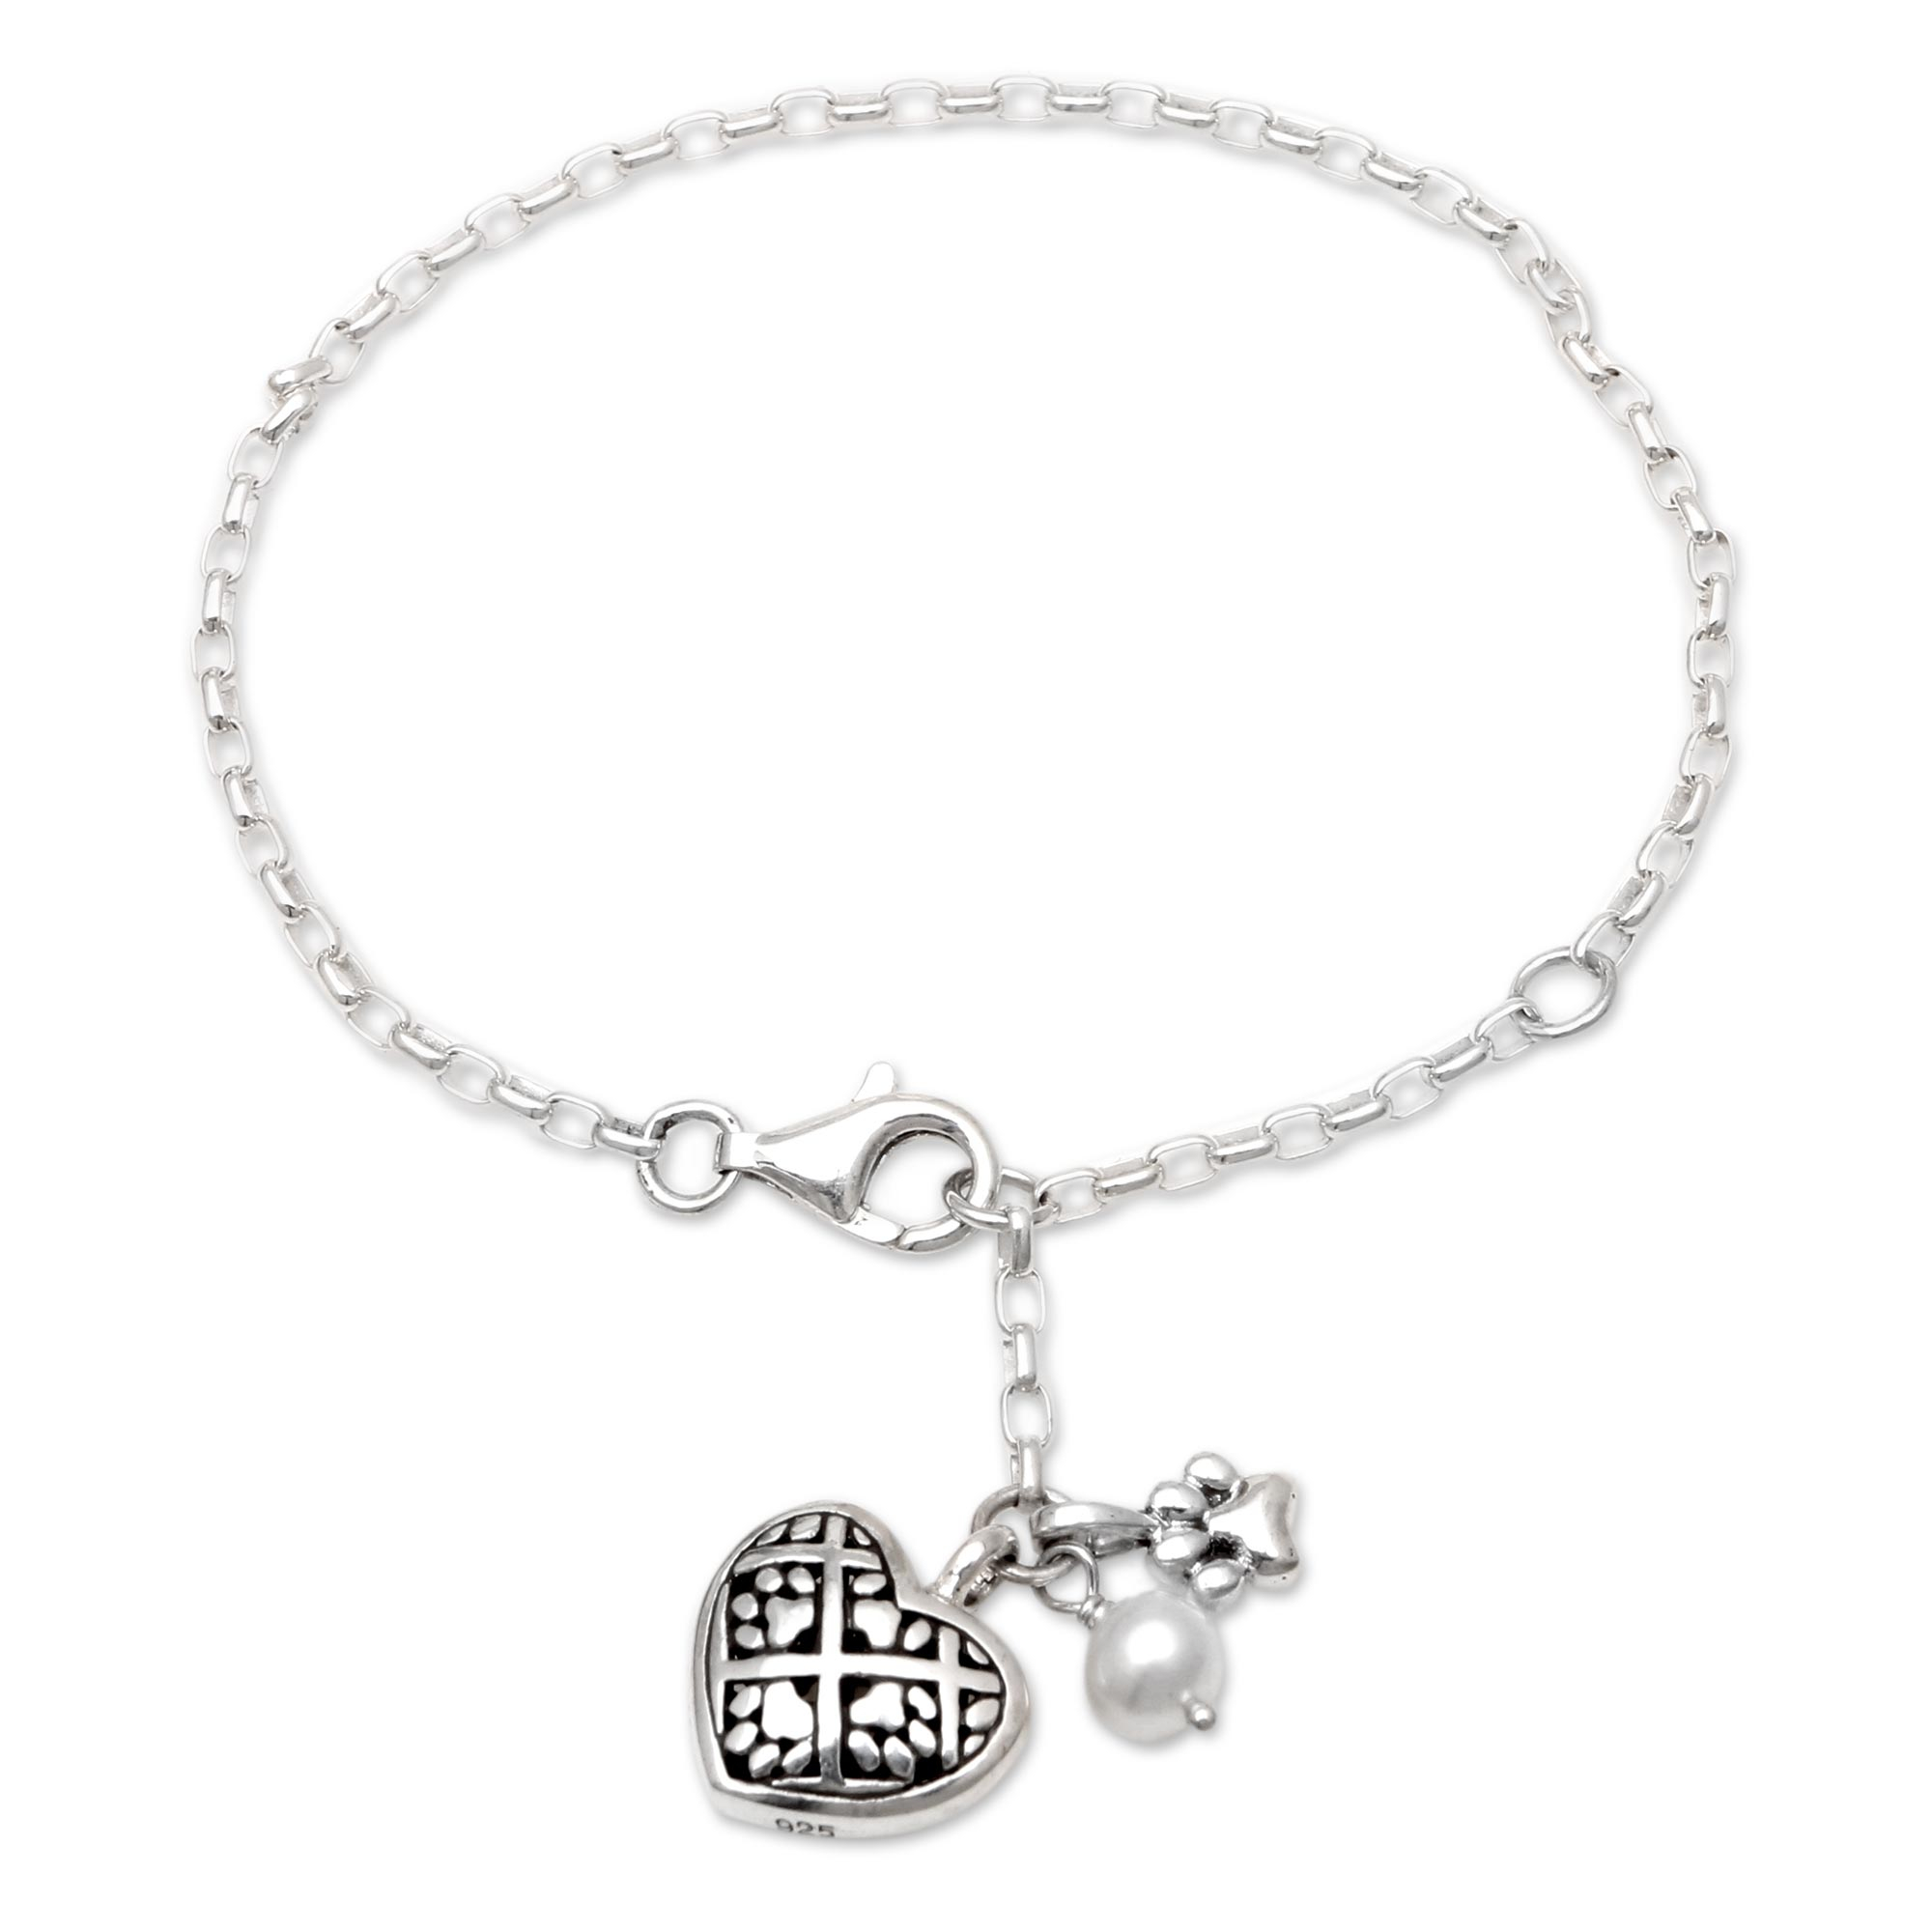 Cultured Pearl Paw Print Charm Bracelet from Bali - Heart Full of Paws ...